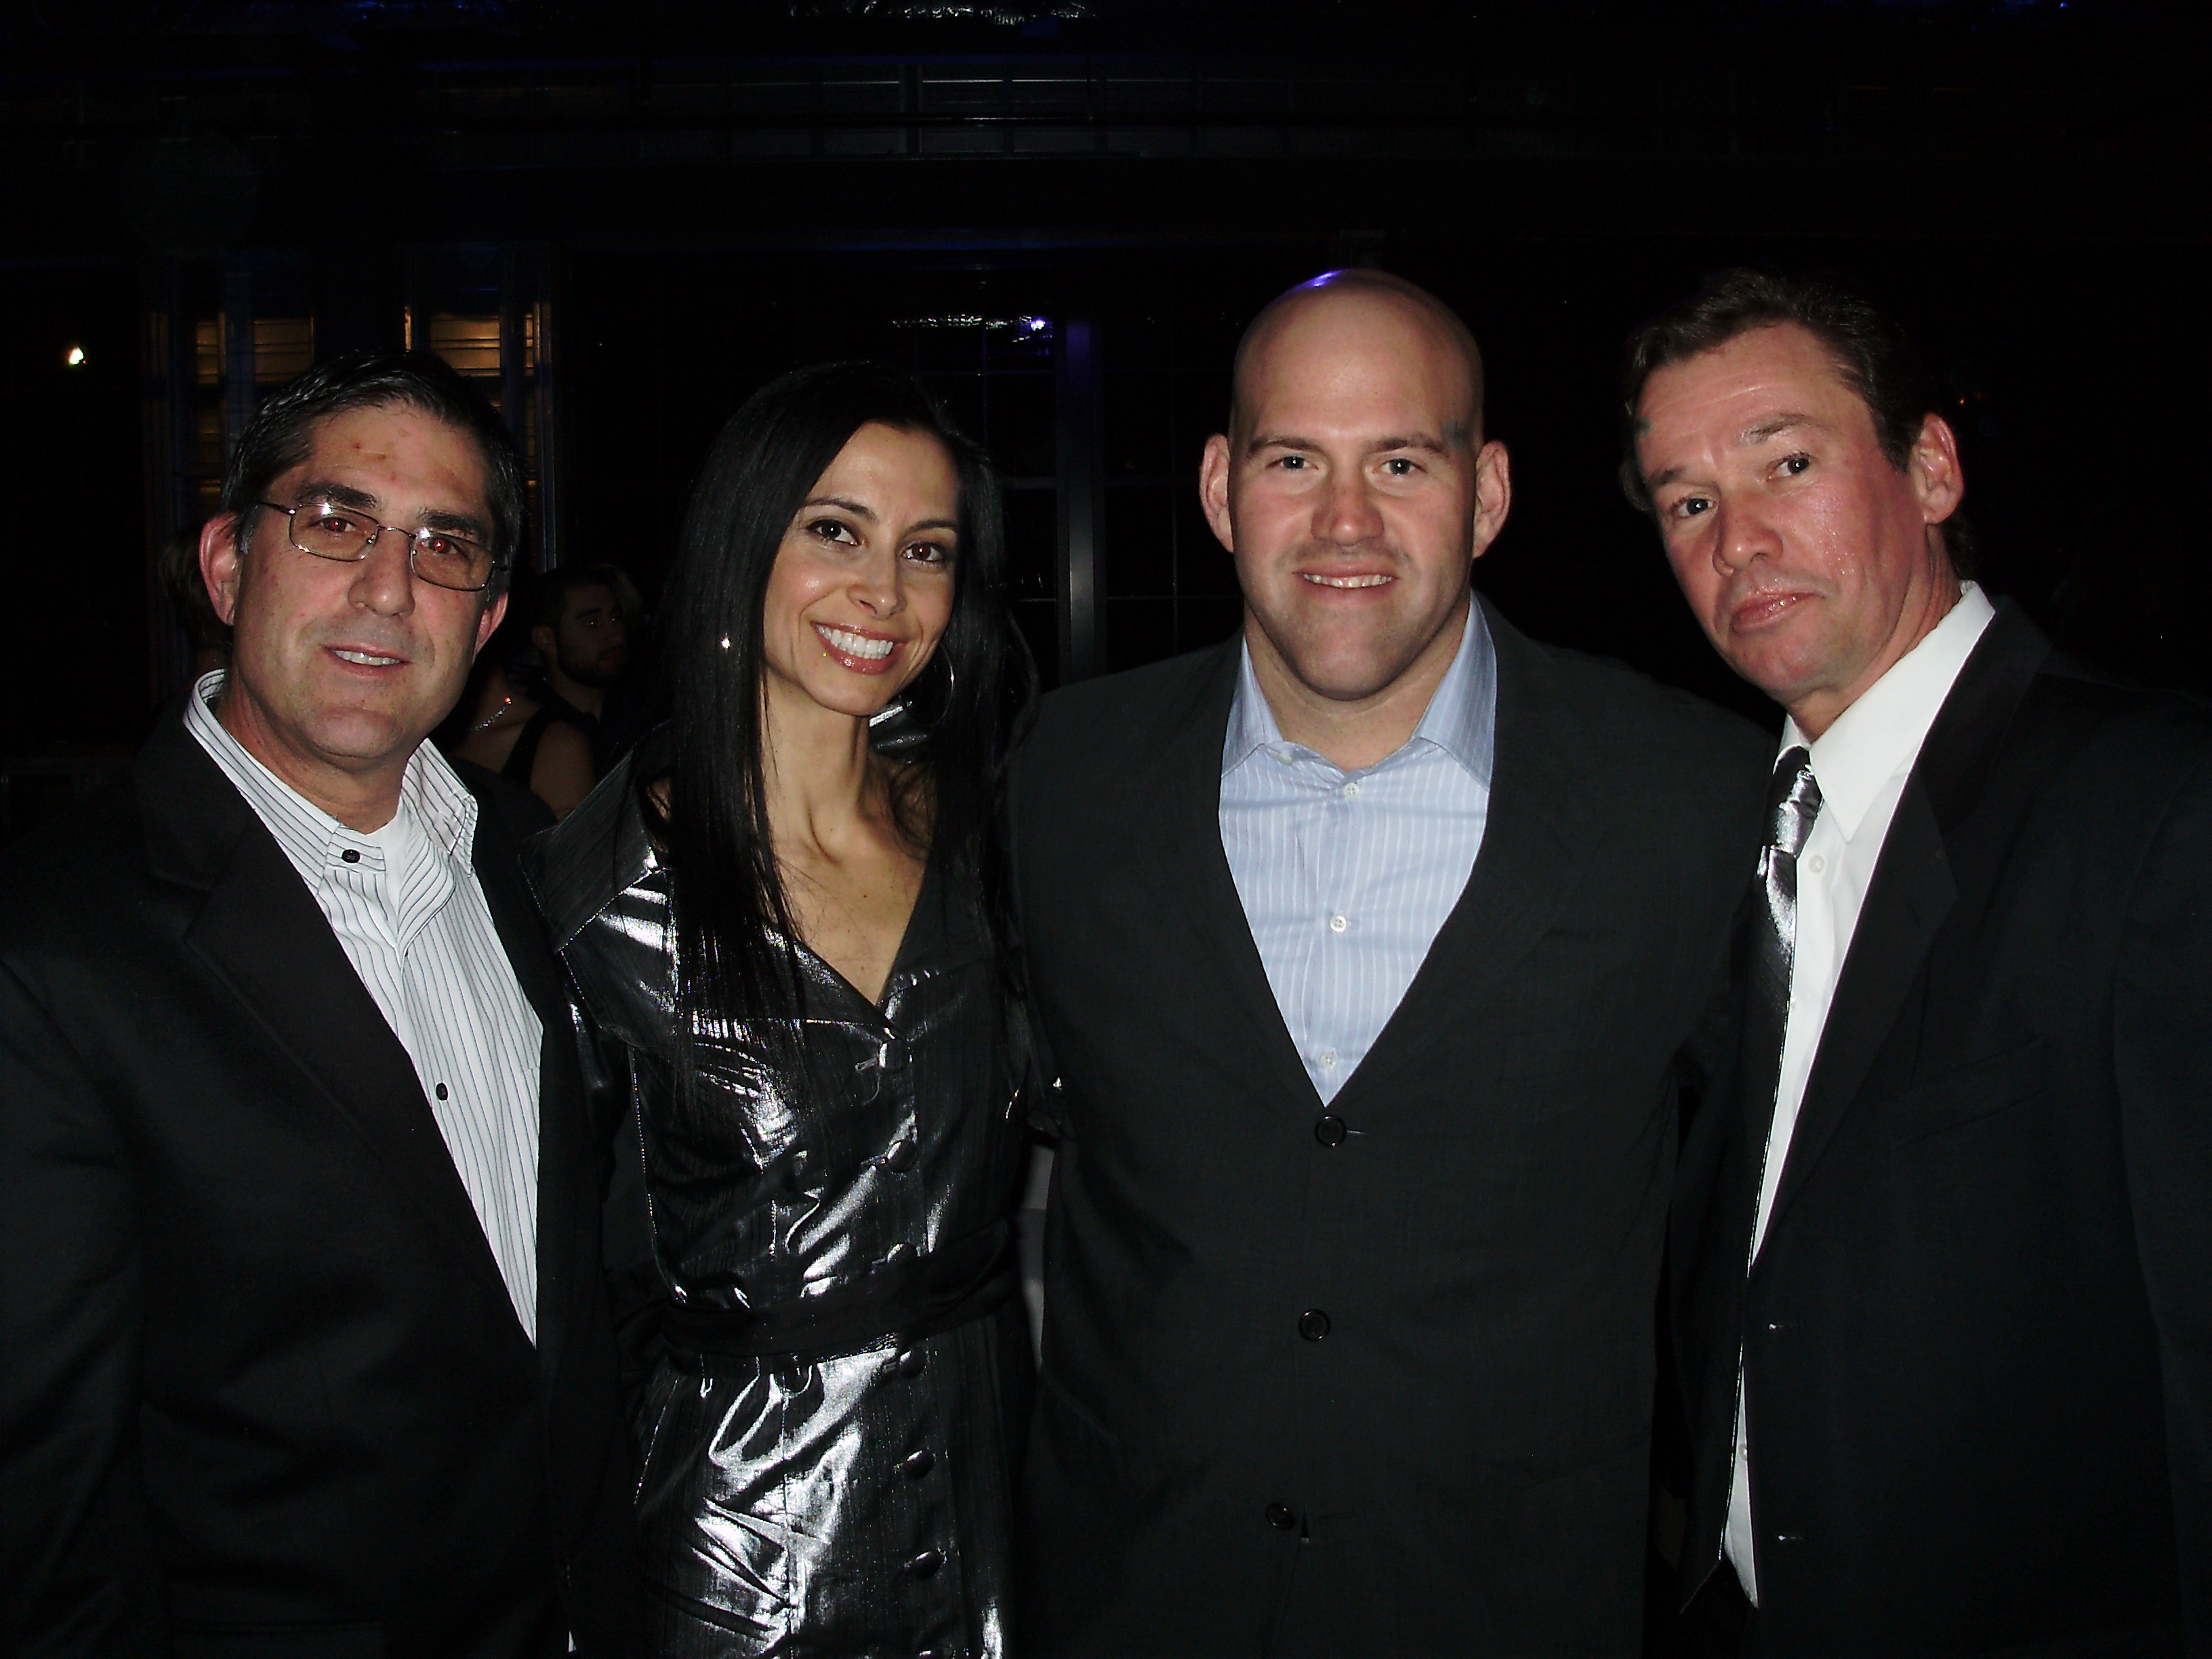 Bobby Boulis, Kevin Youkilis (from the Red Sox), Jennifer Gjulameti, and Arthur Wahlberg. THE FIGHTER.